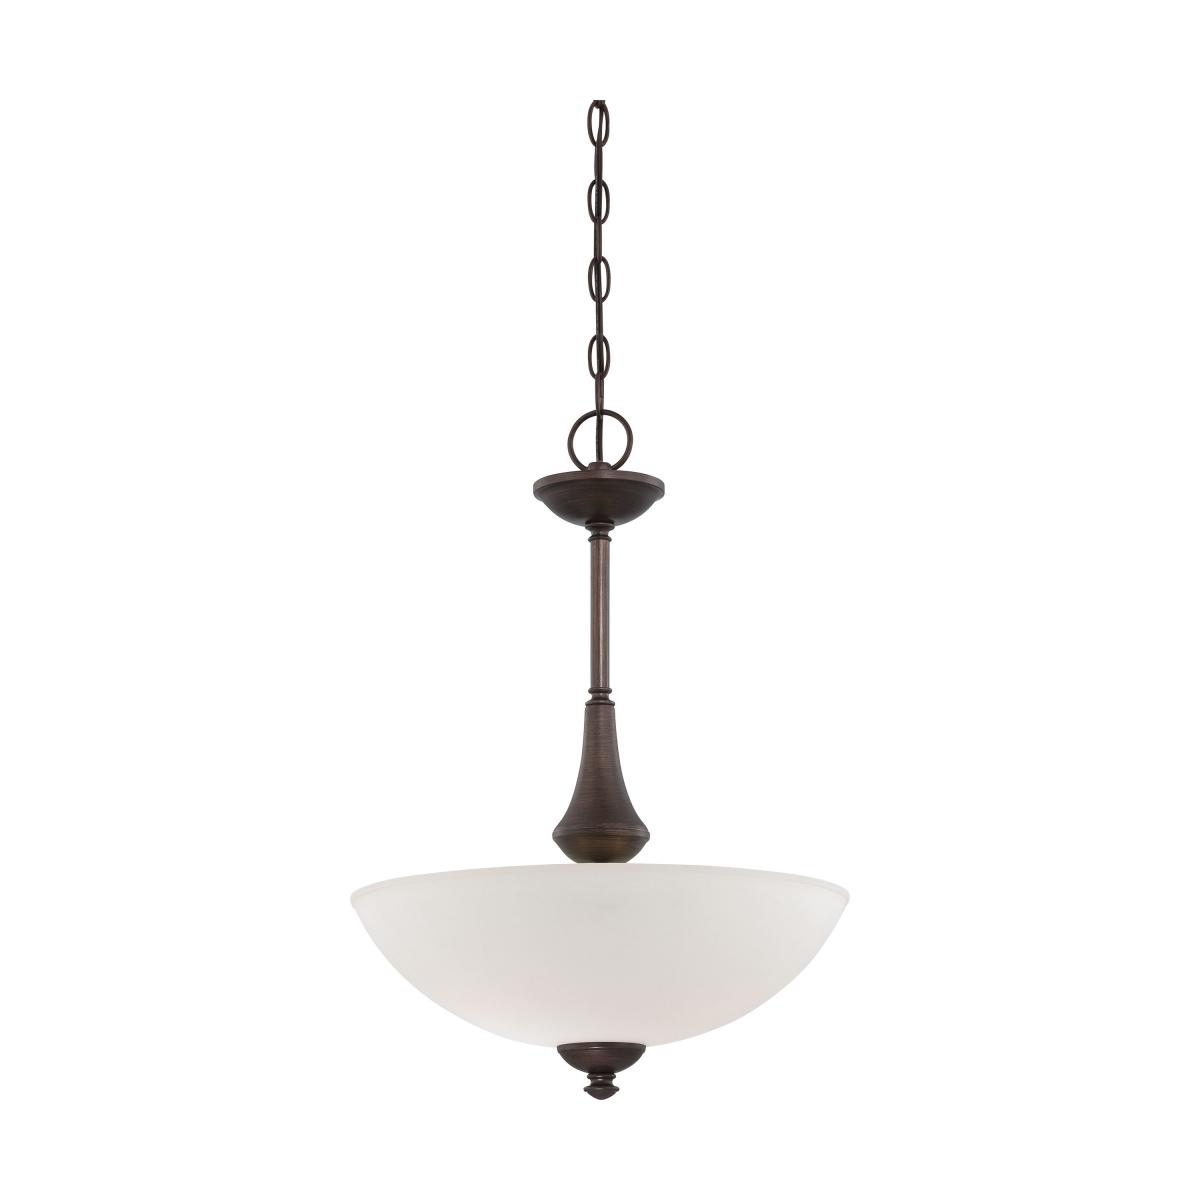 Nuvo 60-5037 Mini Pendant Light in Brushed Nickel Finish with Frosted Glass 